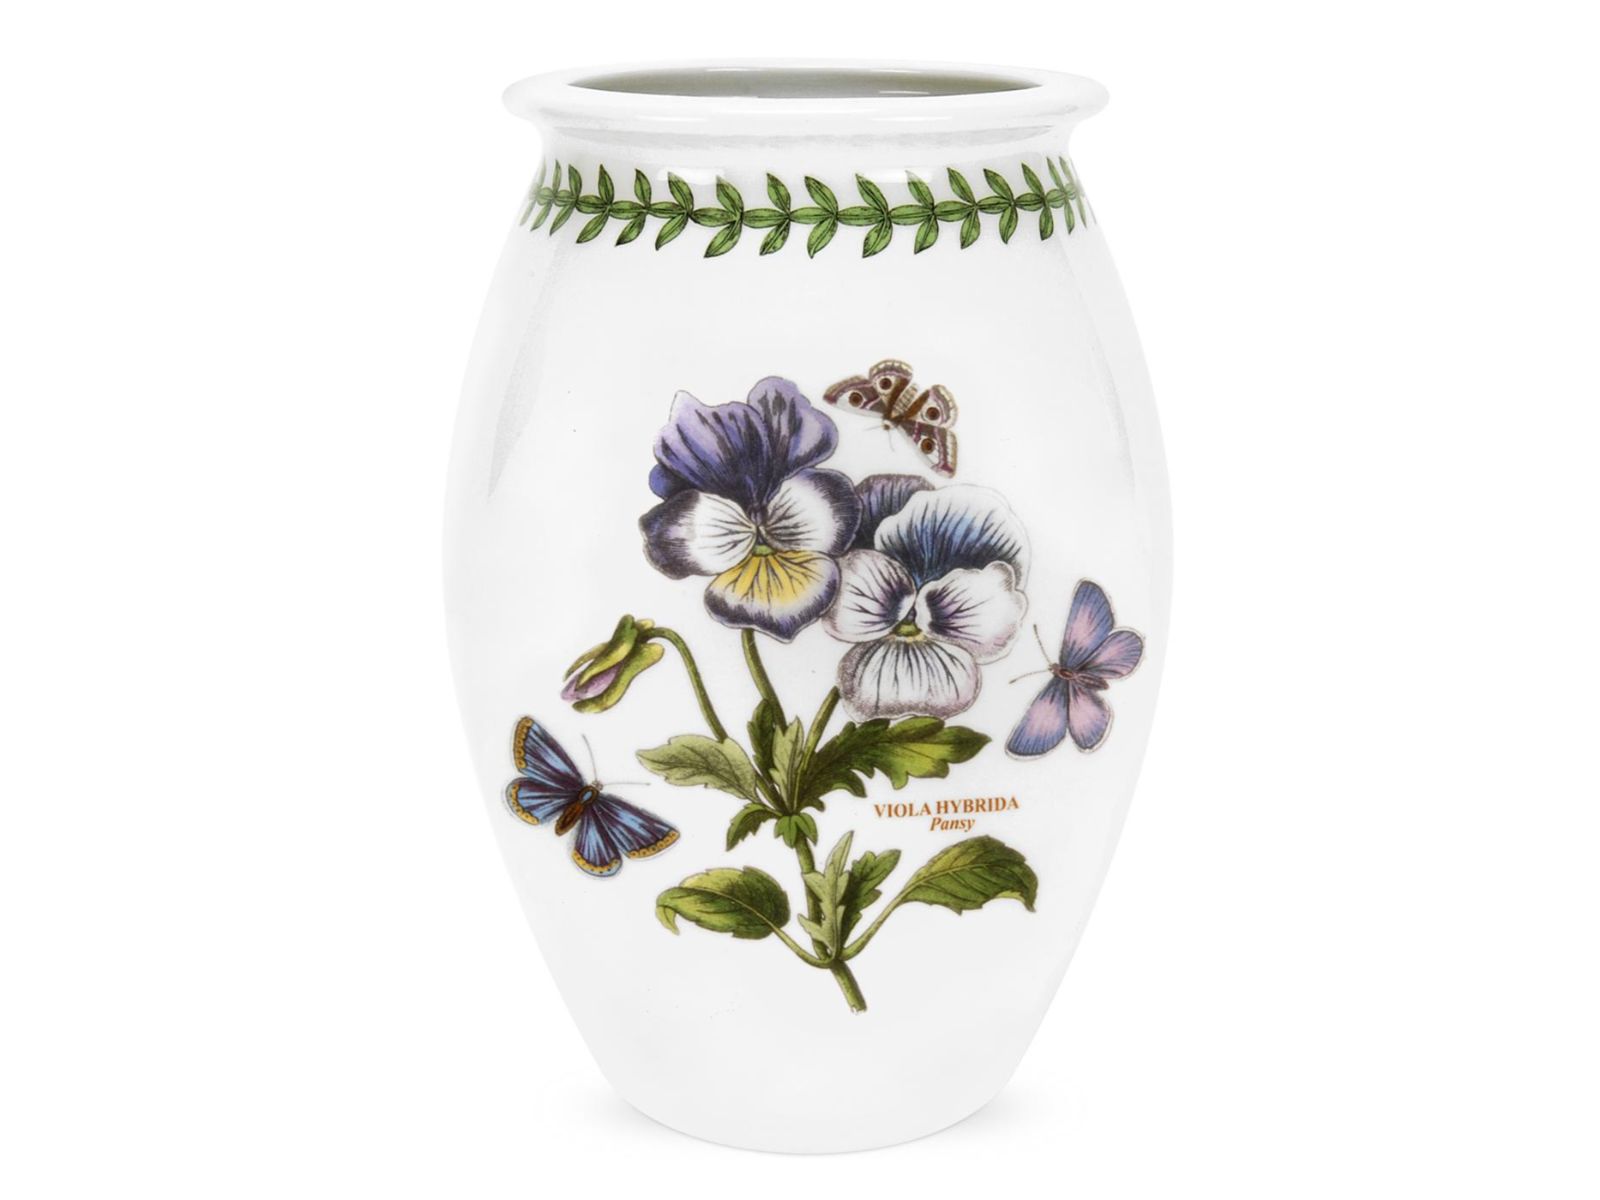 A white porcelain vase with a laurel wreath rim and purple pansy motif on the side